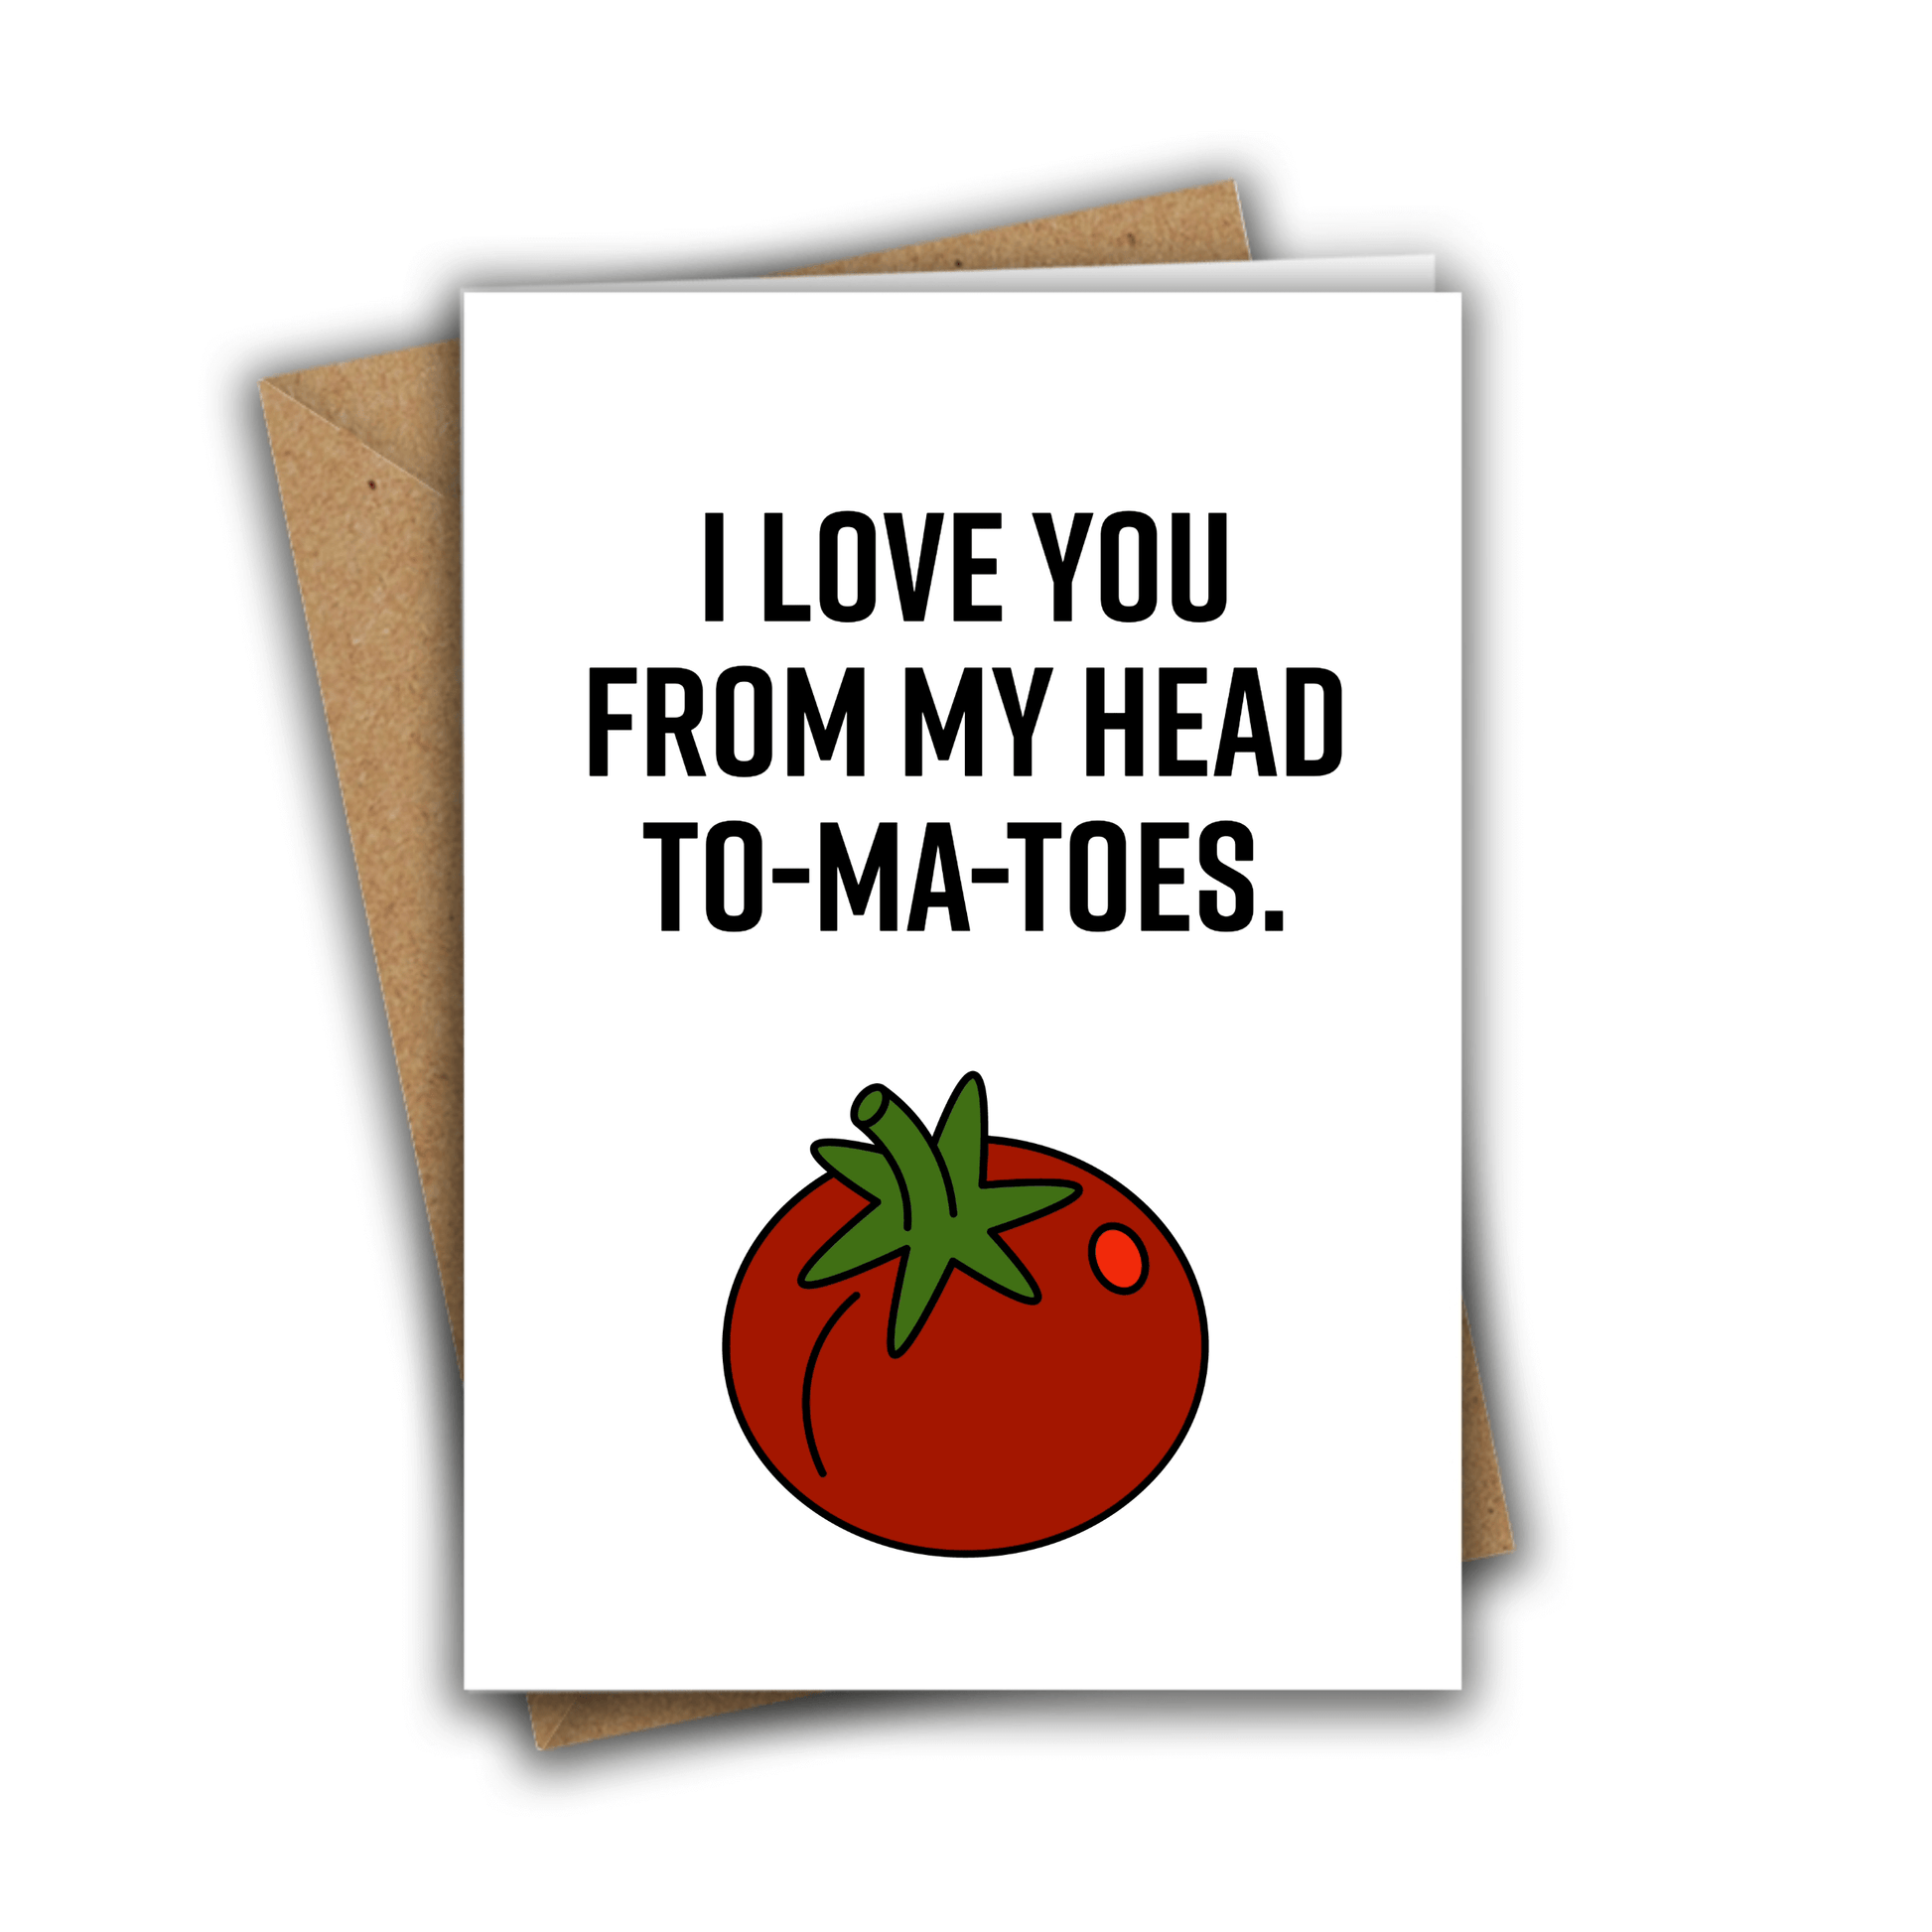 Little Kraken's Love You From My Head To-Ma-Toes, Love Cards for £3.50 each